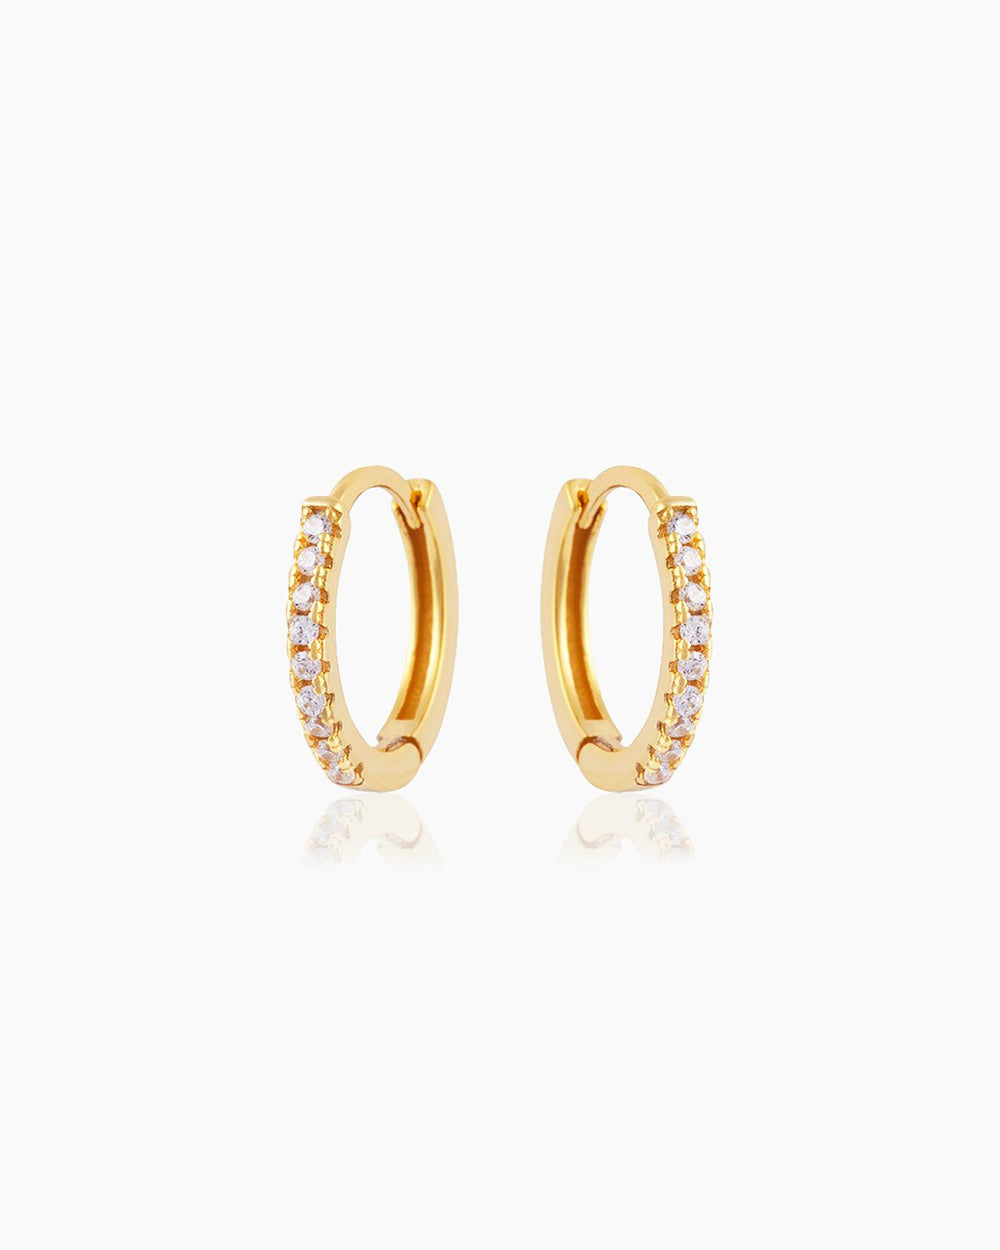 The Amelie Huggies, pavé-set gold earrings perfect for brightening up your look